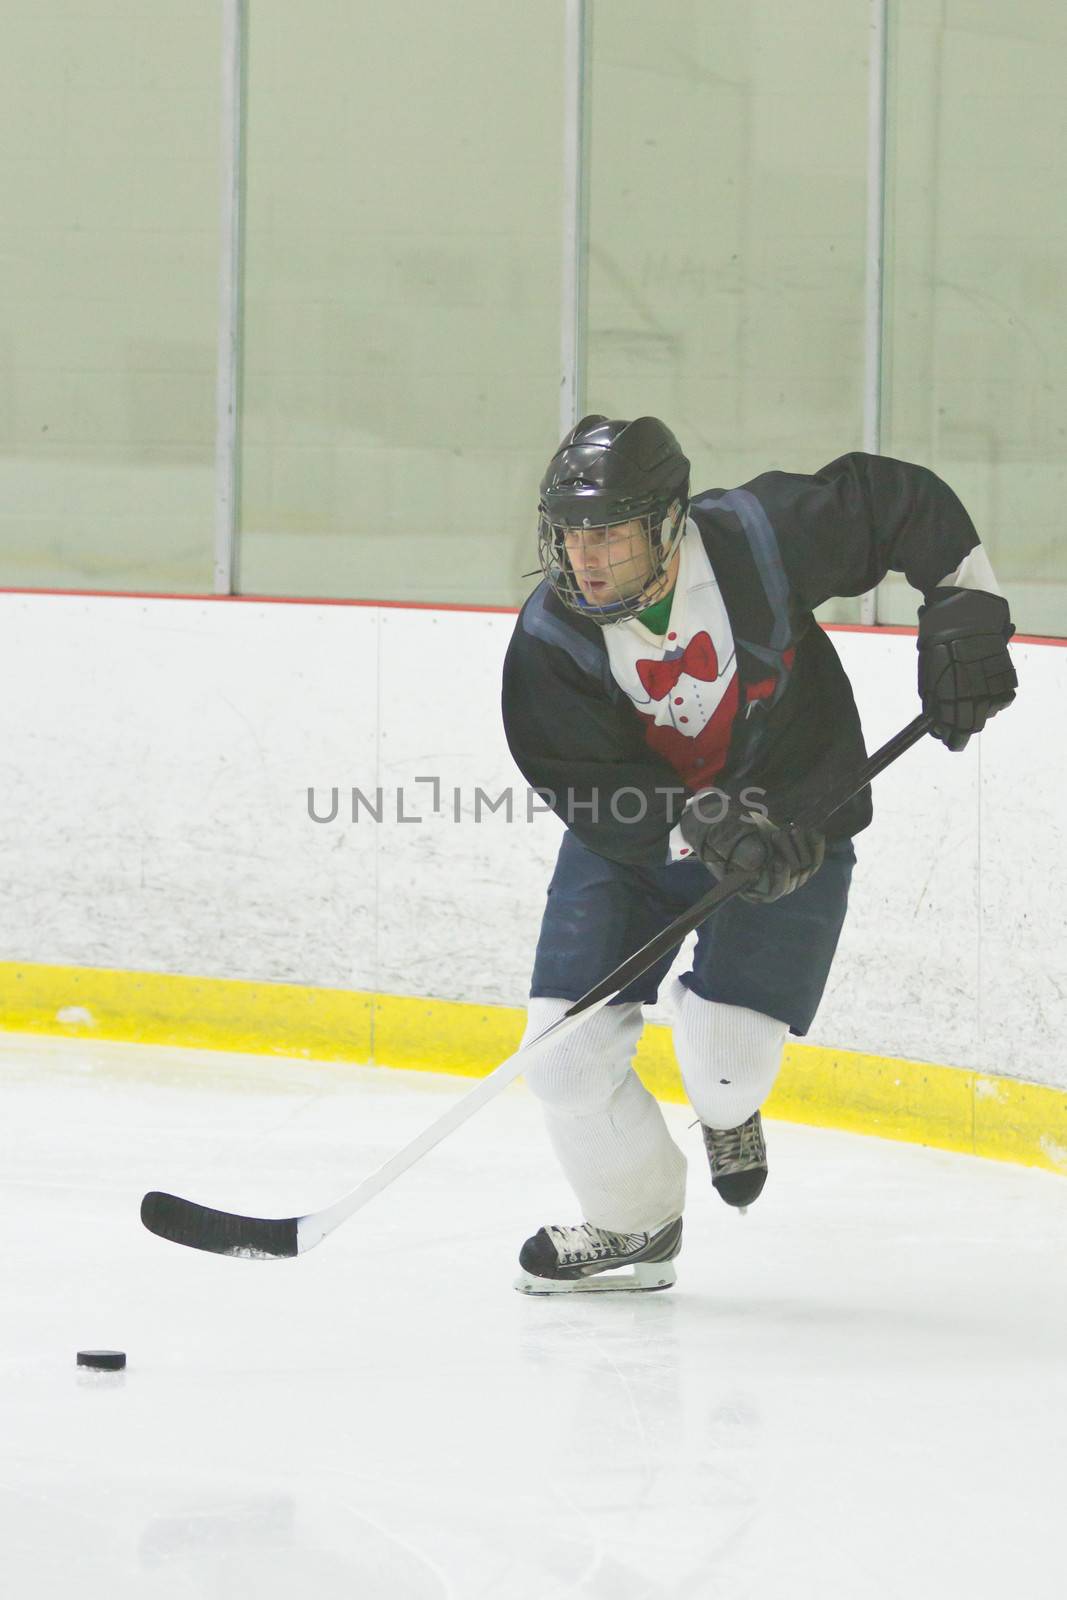 Hockey player skating with the puck